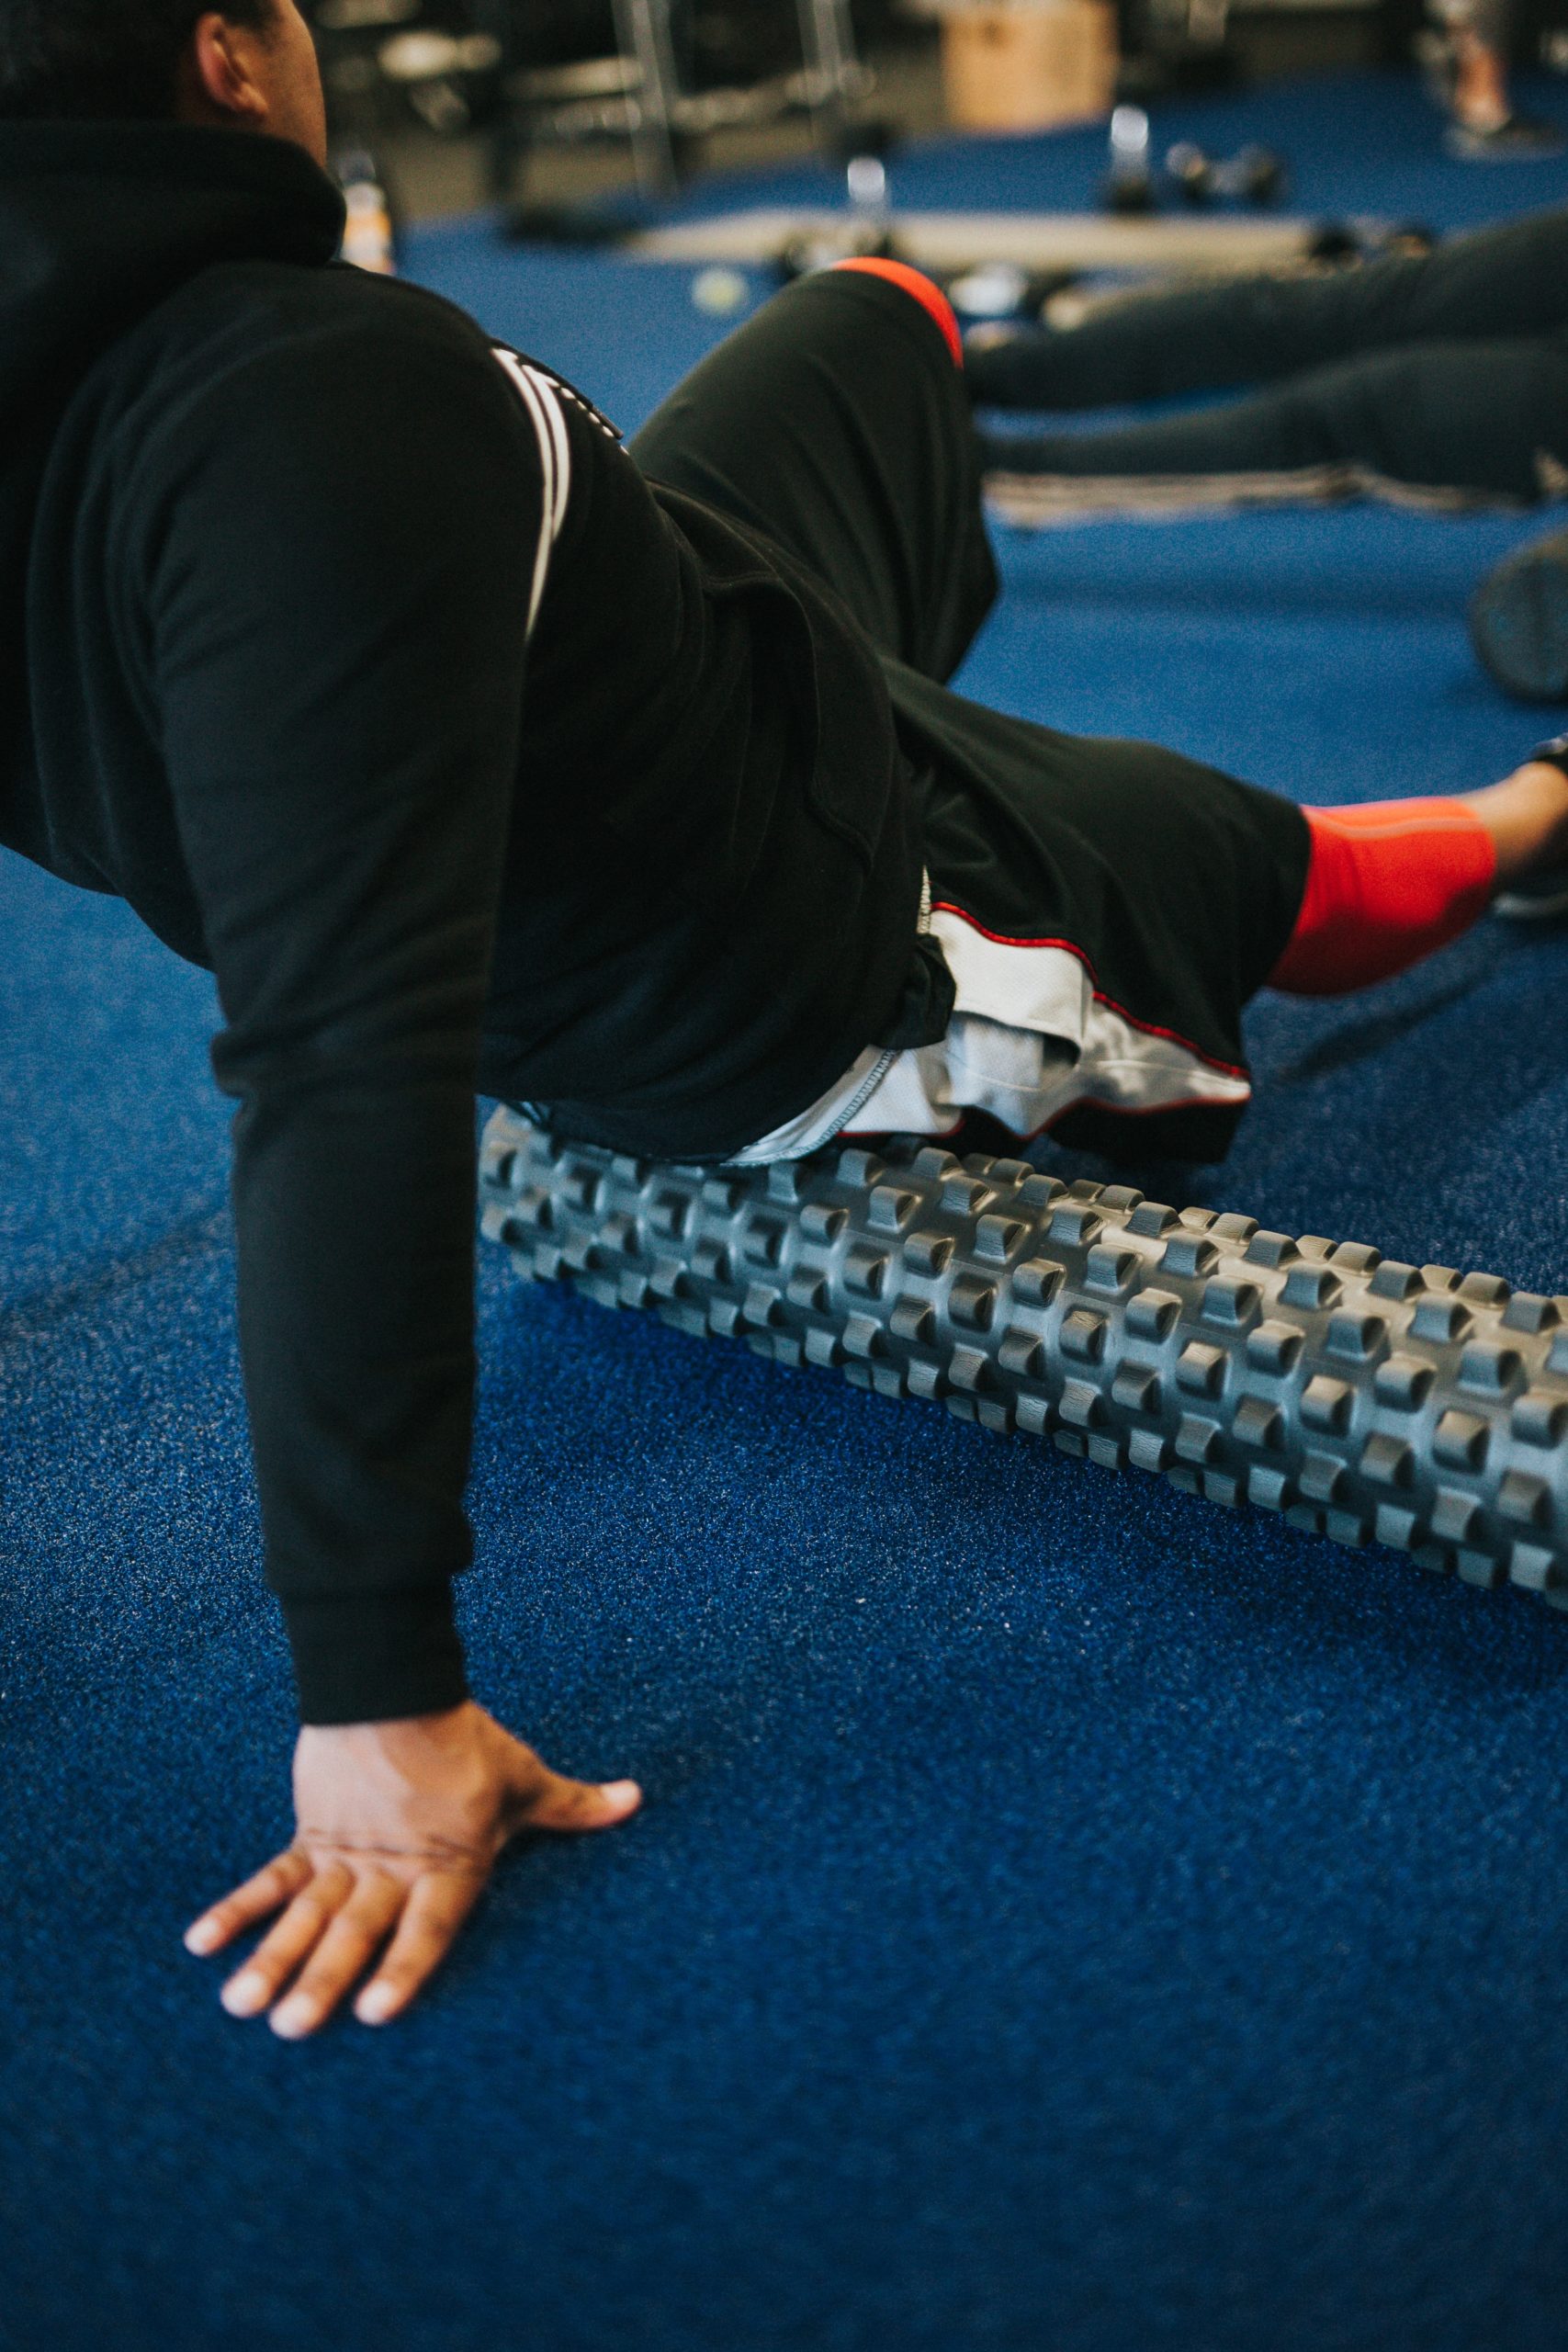 Roll, Roll, Roll Your Butt… What is foam rolling all about?